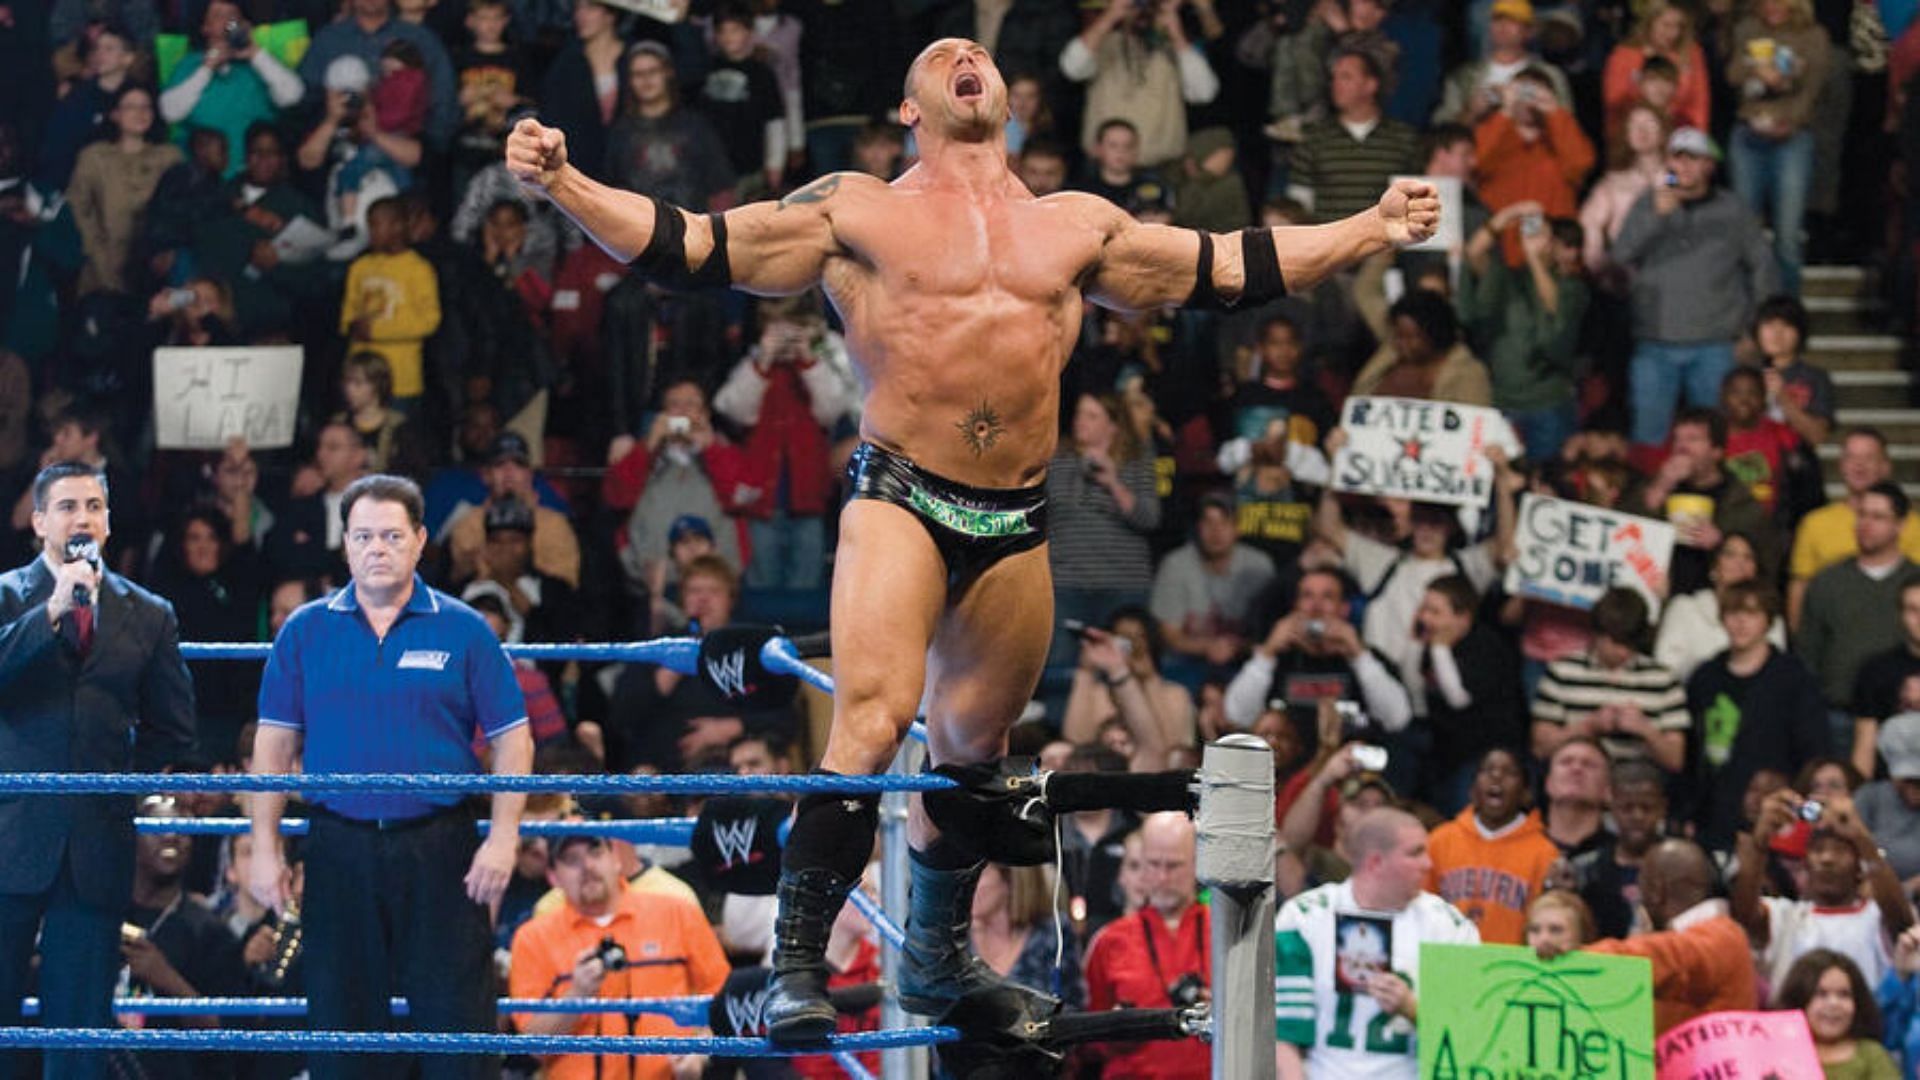 Batista wrestled his last match for WWE at WrestleMania 35